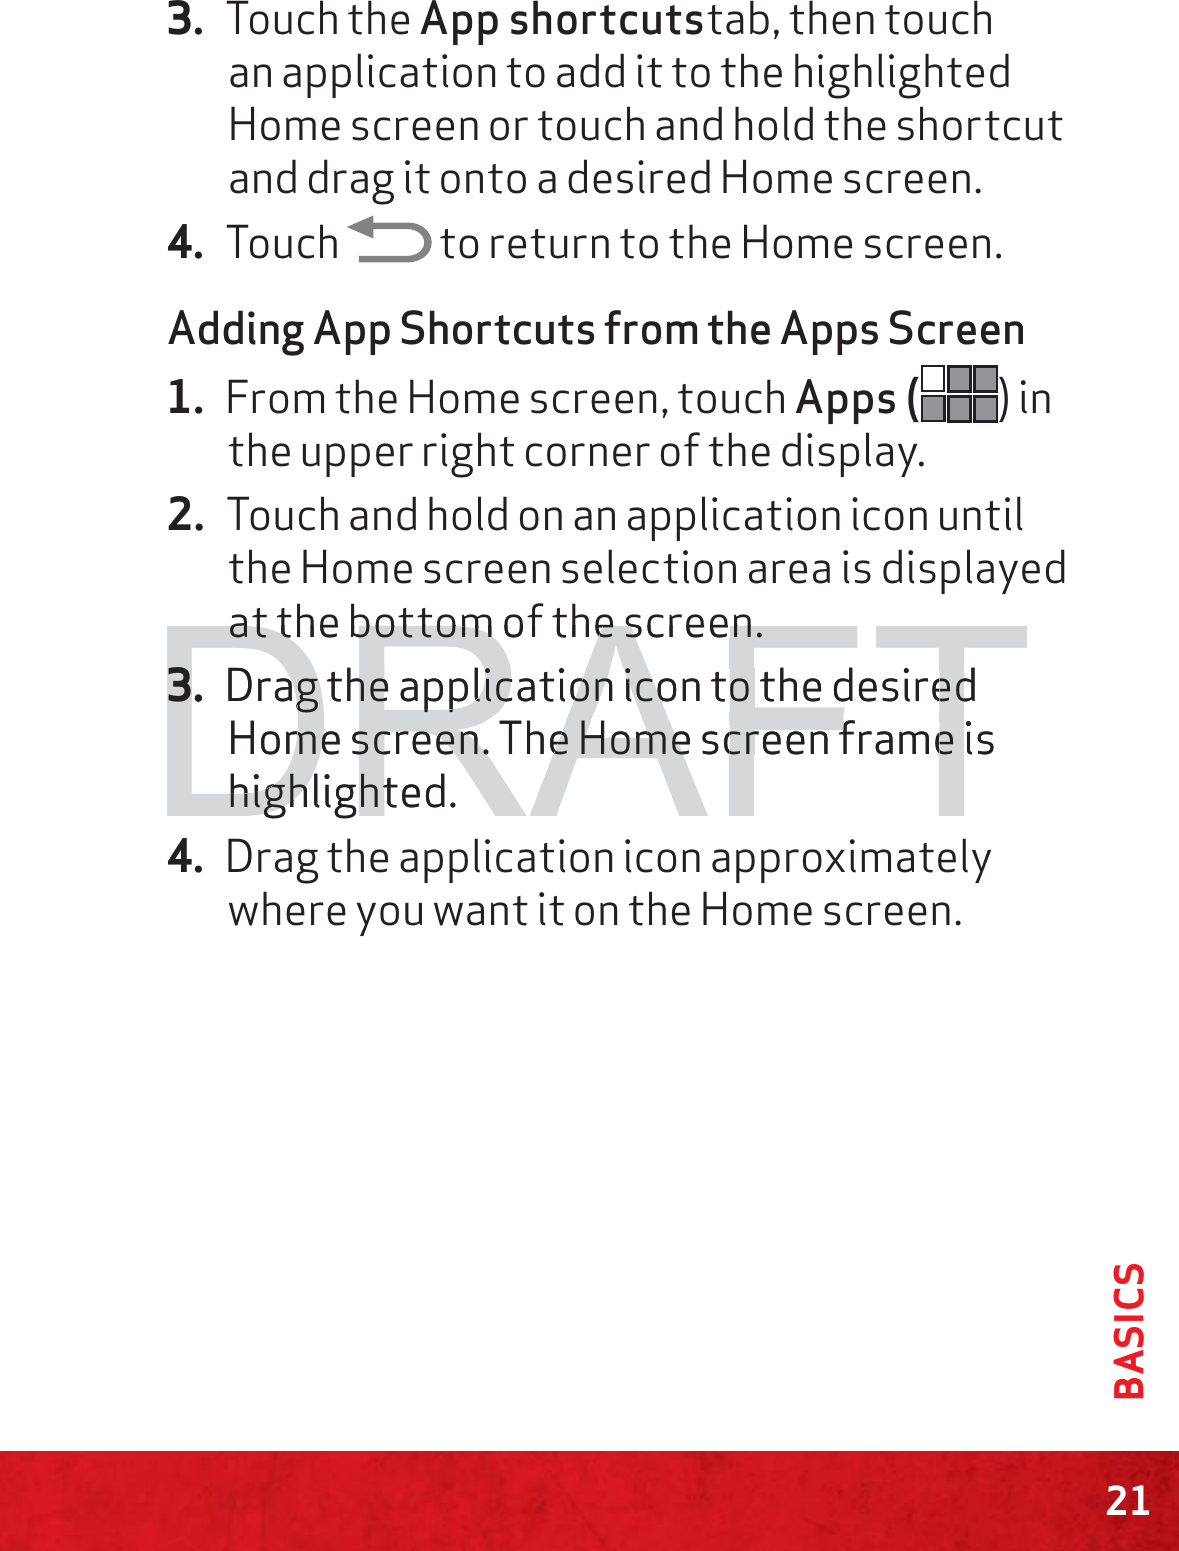 21BASICS3. Touch the App shortcutstab, then touch an application to add it to the highlighted Home screen or touch and hold the shortcut and drag it onto a desired Home screen.4. Touch   to return to the Home screen.Adding App Shortcuts from the Apps Screen1. From the Home screen, touch Apps ( ) in the upper right corner of the display.2. Touch and hold on an application icon until the Home screen selection area is displayed at the bottom of the screen.3. Drag the application icon to the desired Home screen. The Home screen frame is highlighted.4. Drag the application icon approximately where you want it on the Home screen.DRAFTat the bottom of the screen.at the bottom of the screen.3.3Drag the application icon to the desiredag the application icon to the desiredHome screen. The Home screen frame isme screen. The Home screen frame highlighted.highlight